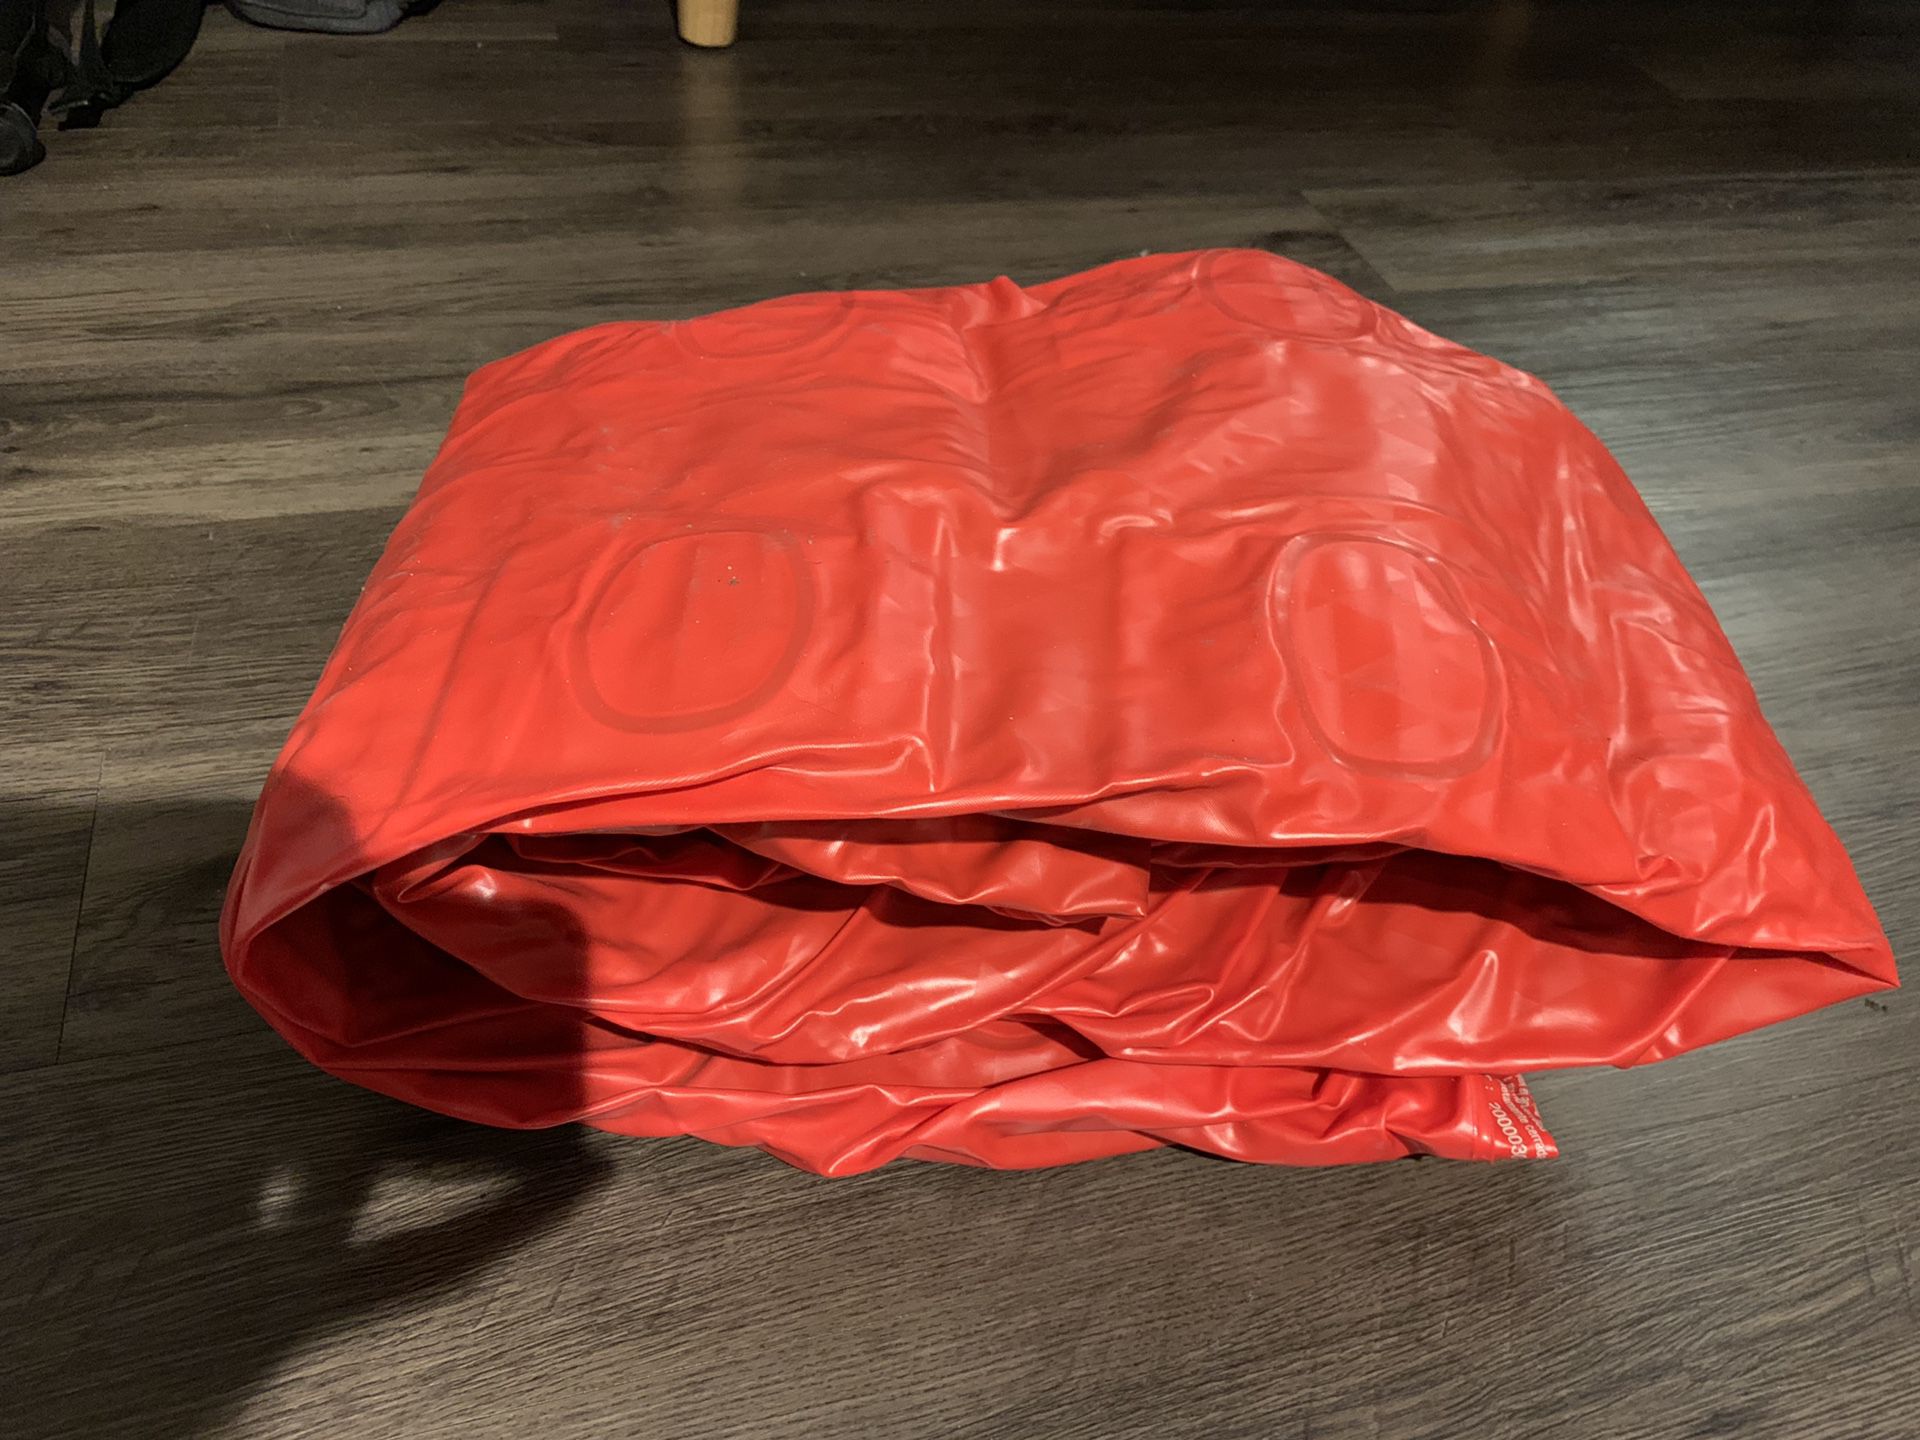 Inflatable mattress with inflator